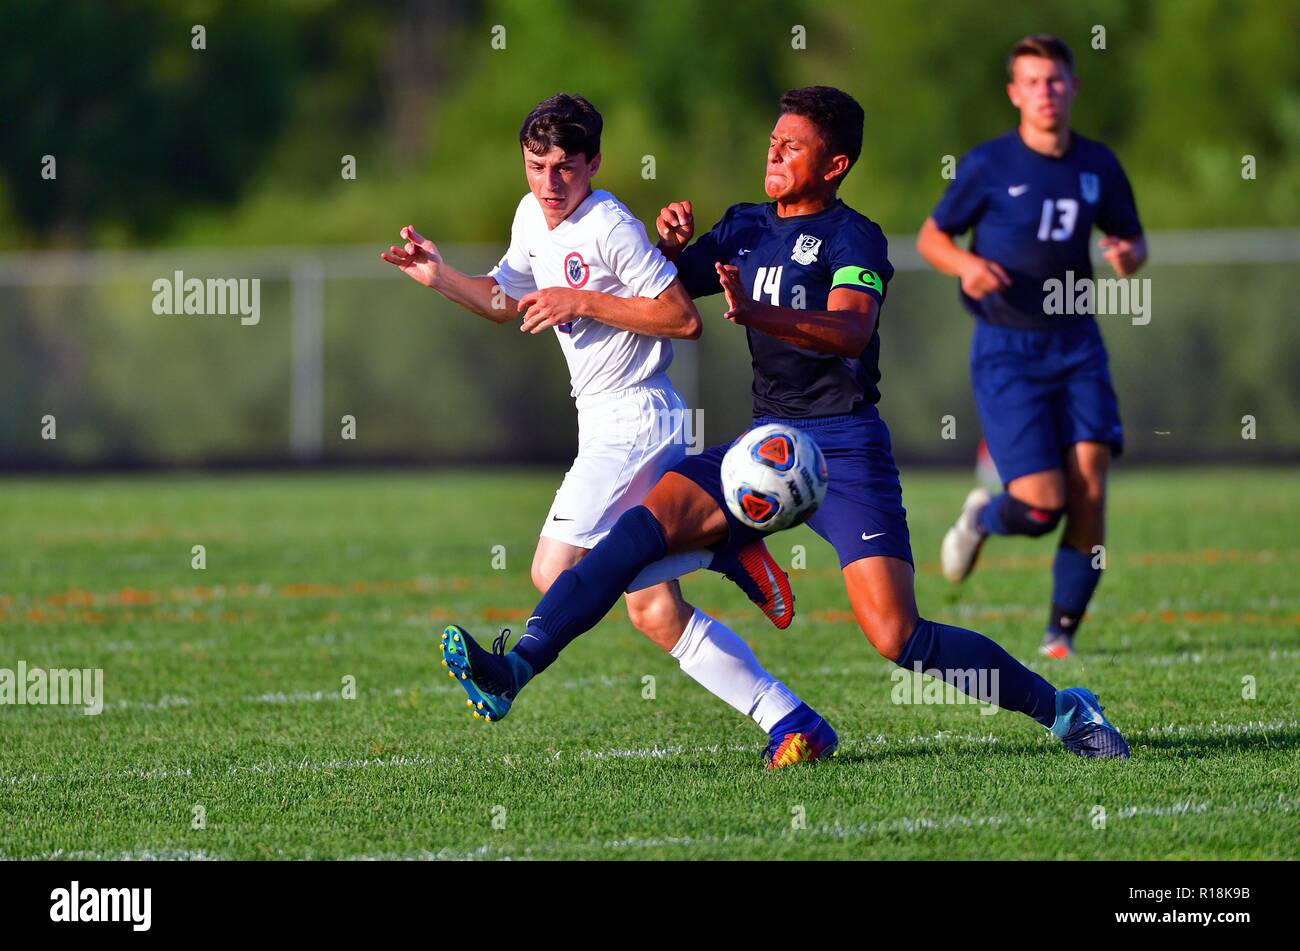 Players battling for possession of the ball during a physical confrontation and exchange. USA. Stock Photo